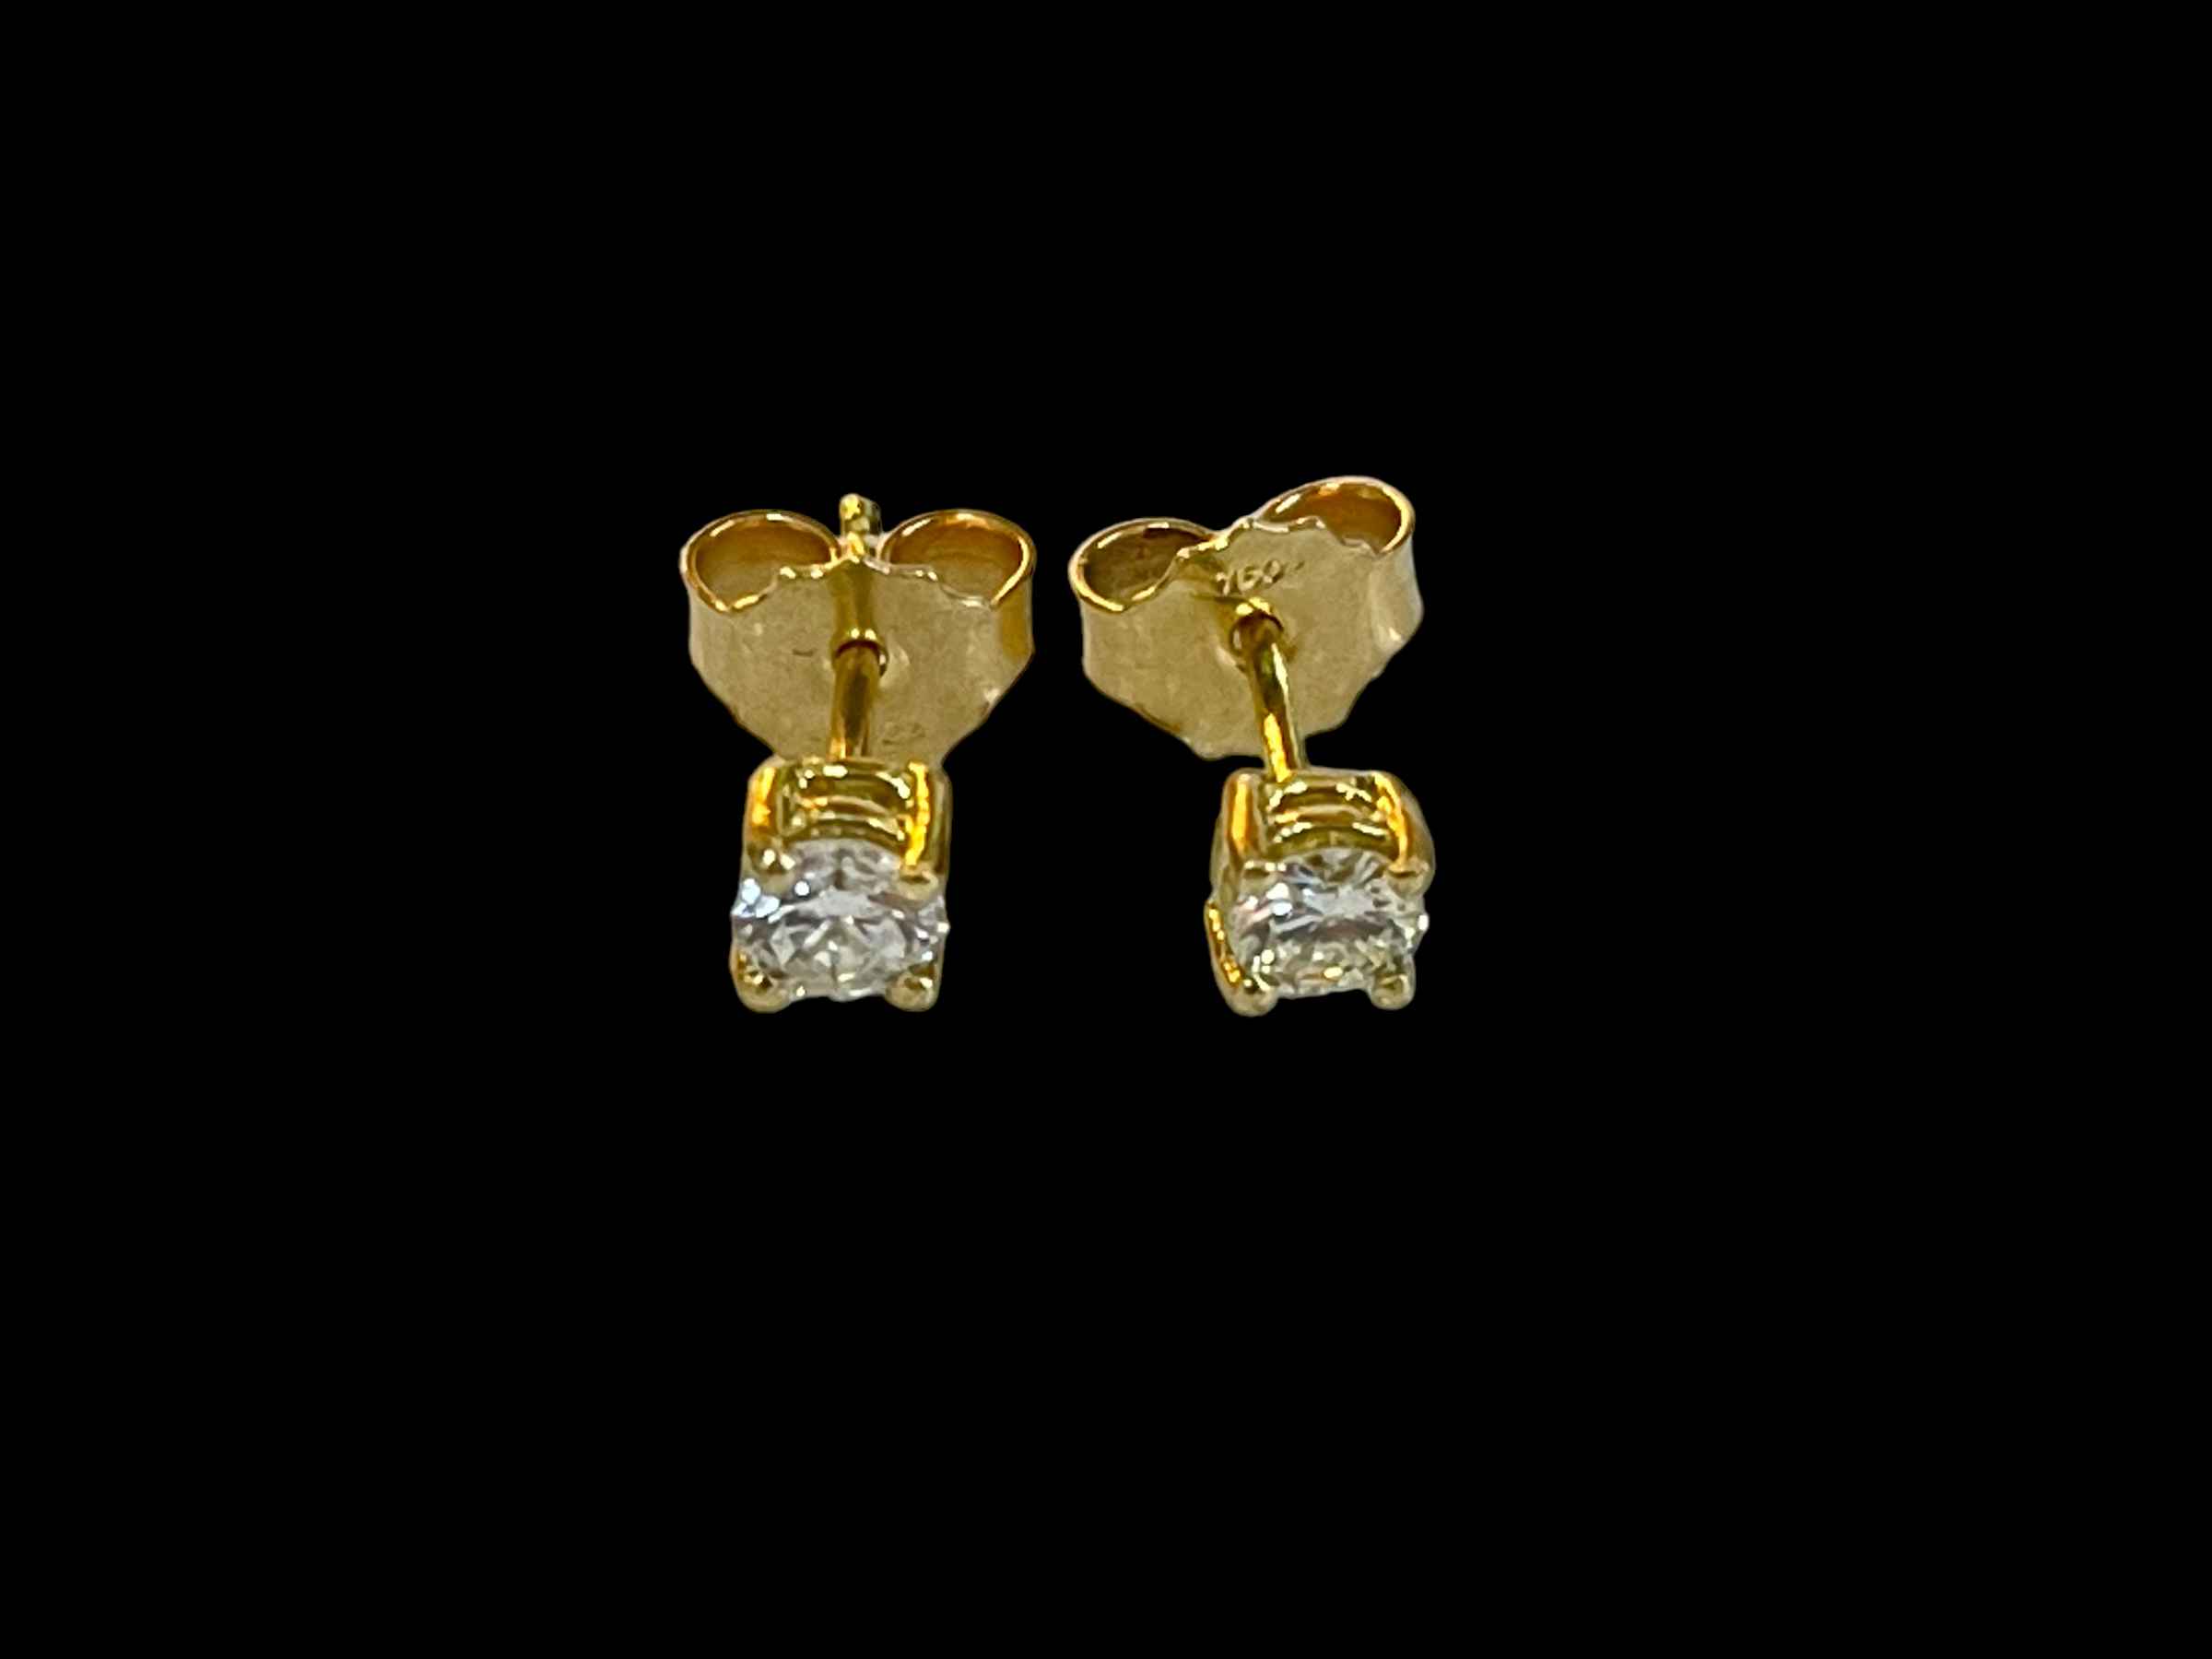 Pair of diamond stud earrings set in 18 carat yellow gold, diamonds approximately 0.40 carats.